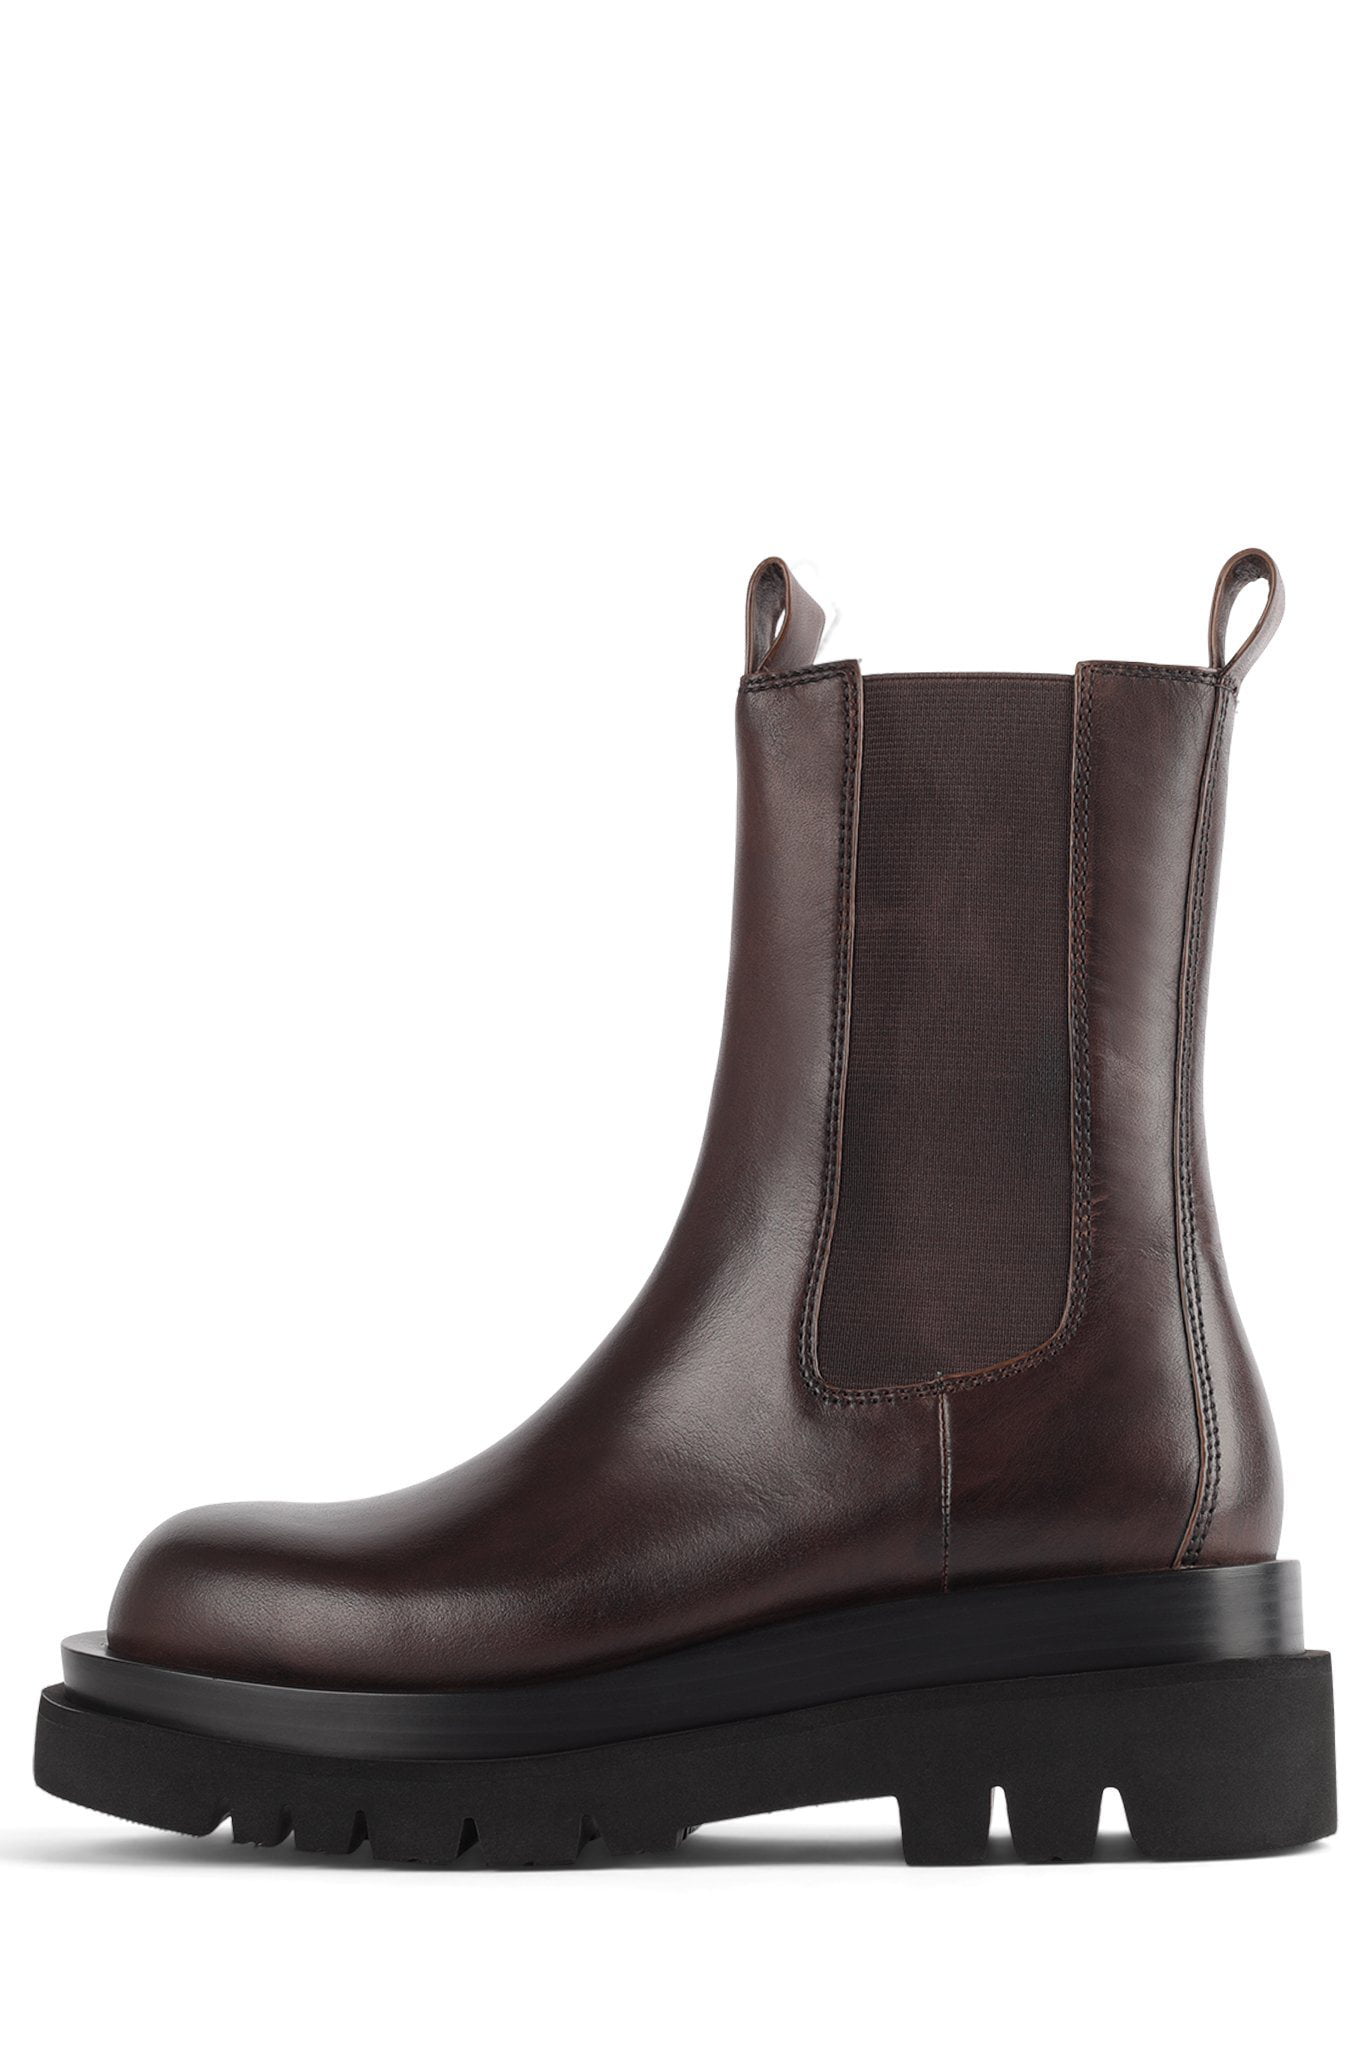 Jeffrey Campbell Tanked Mid Calf Chelsea Boot DARK BROWN Moto Boots ...